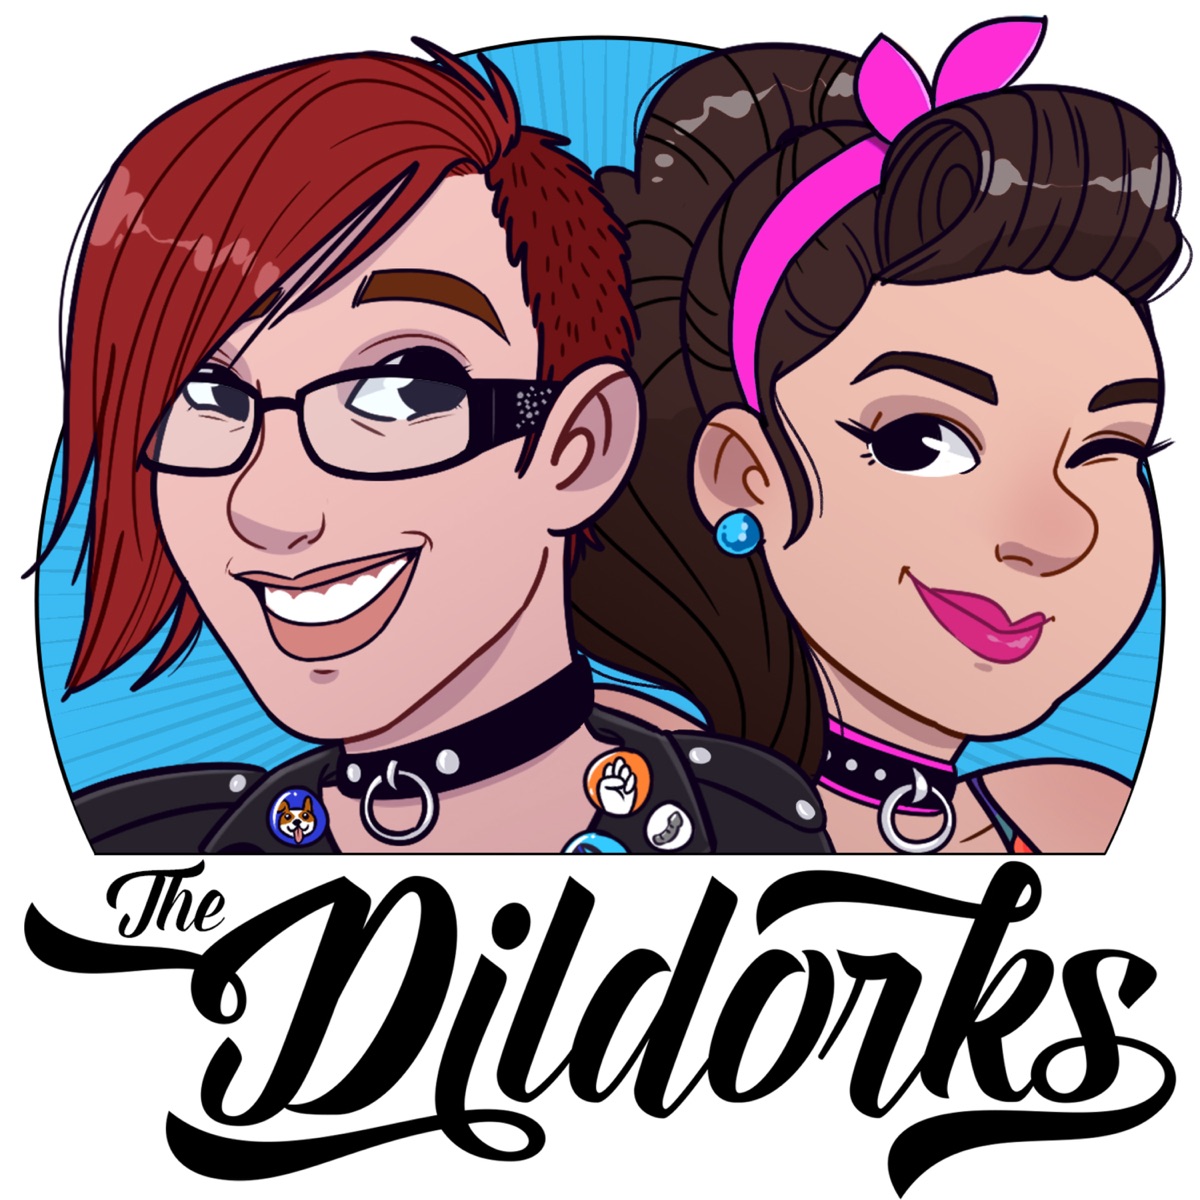 The Dildorks – Podcast – cover art, cartoon drawing of two queer people wearing sub collars and eccentric fashion